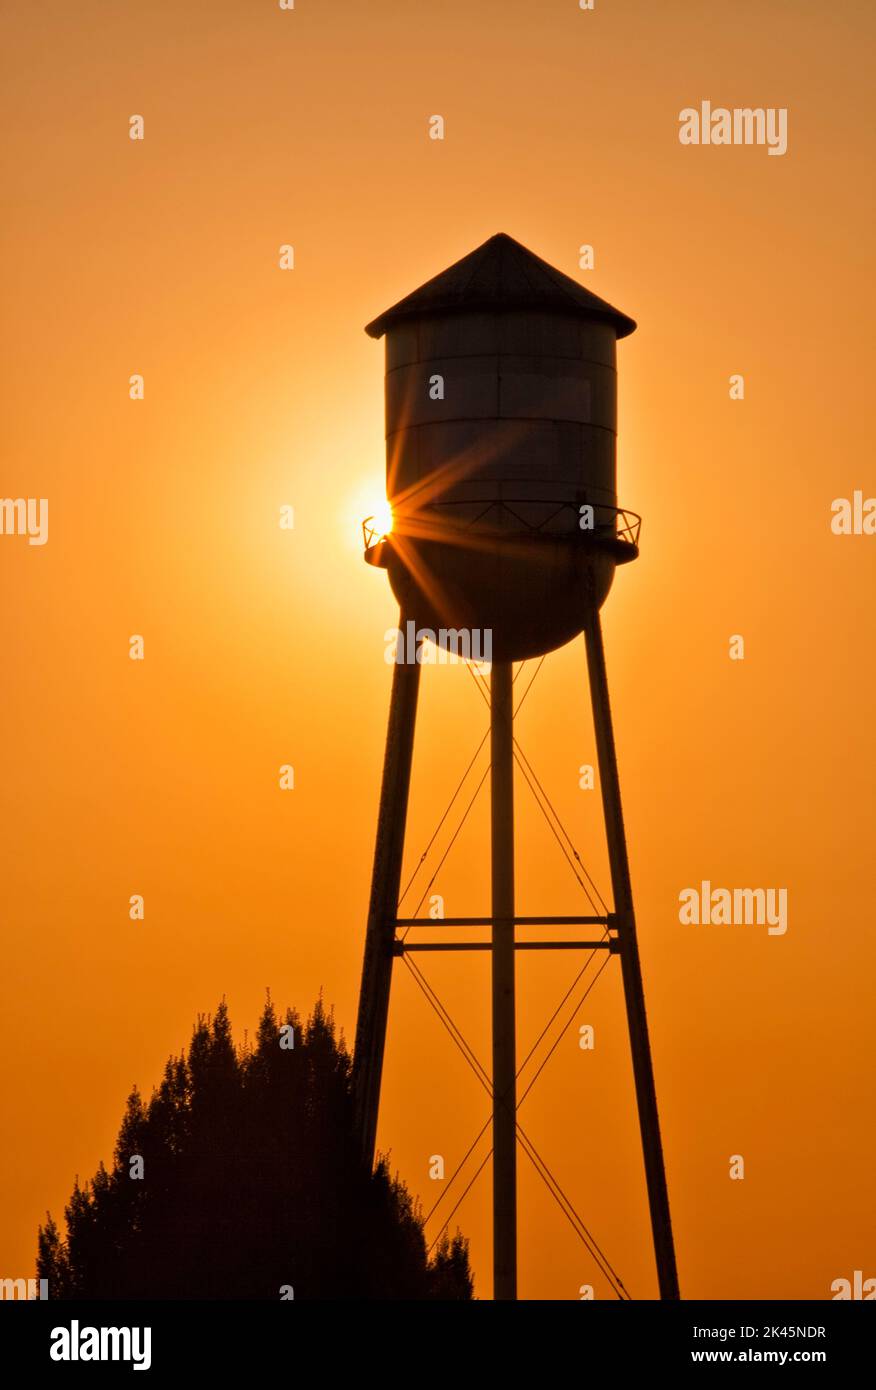 Sun setting behind agricultural water tower. Stock Photo